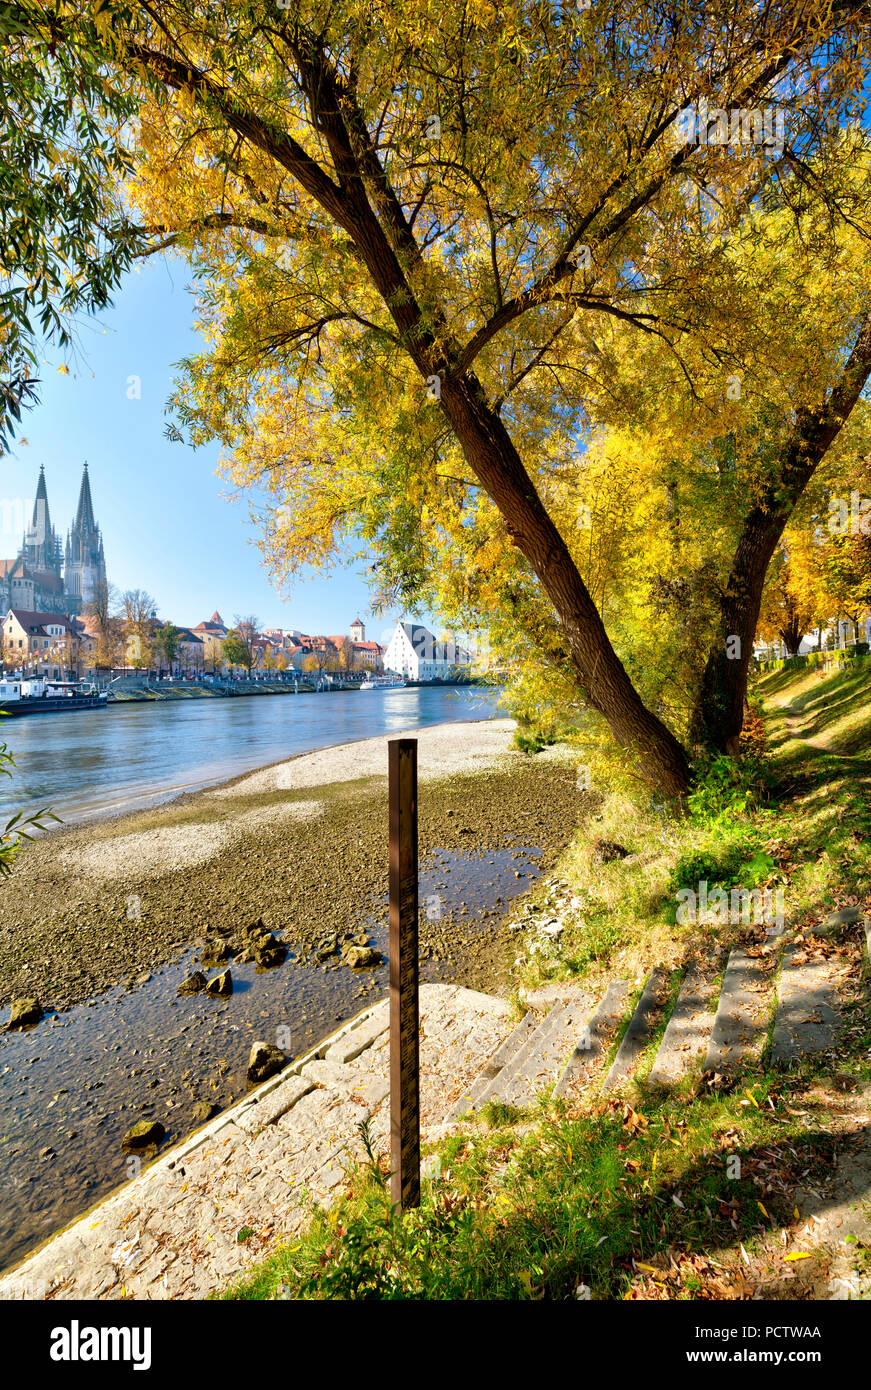 View from the Jahn Island, Marc-Aurel-Ufer, cathedral, waterfront, autumn, Regensburg, Upper Palatinate, Bavaria, Germany, Europe, Stock Photo